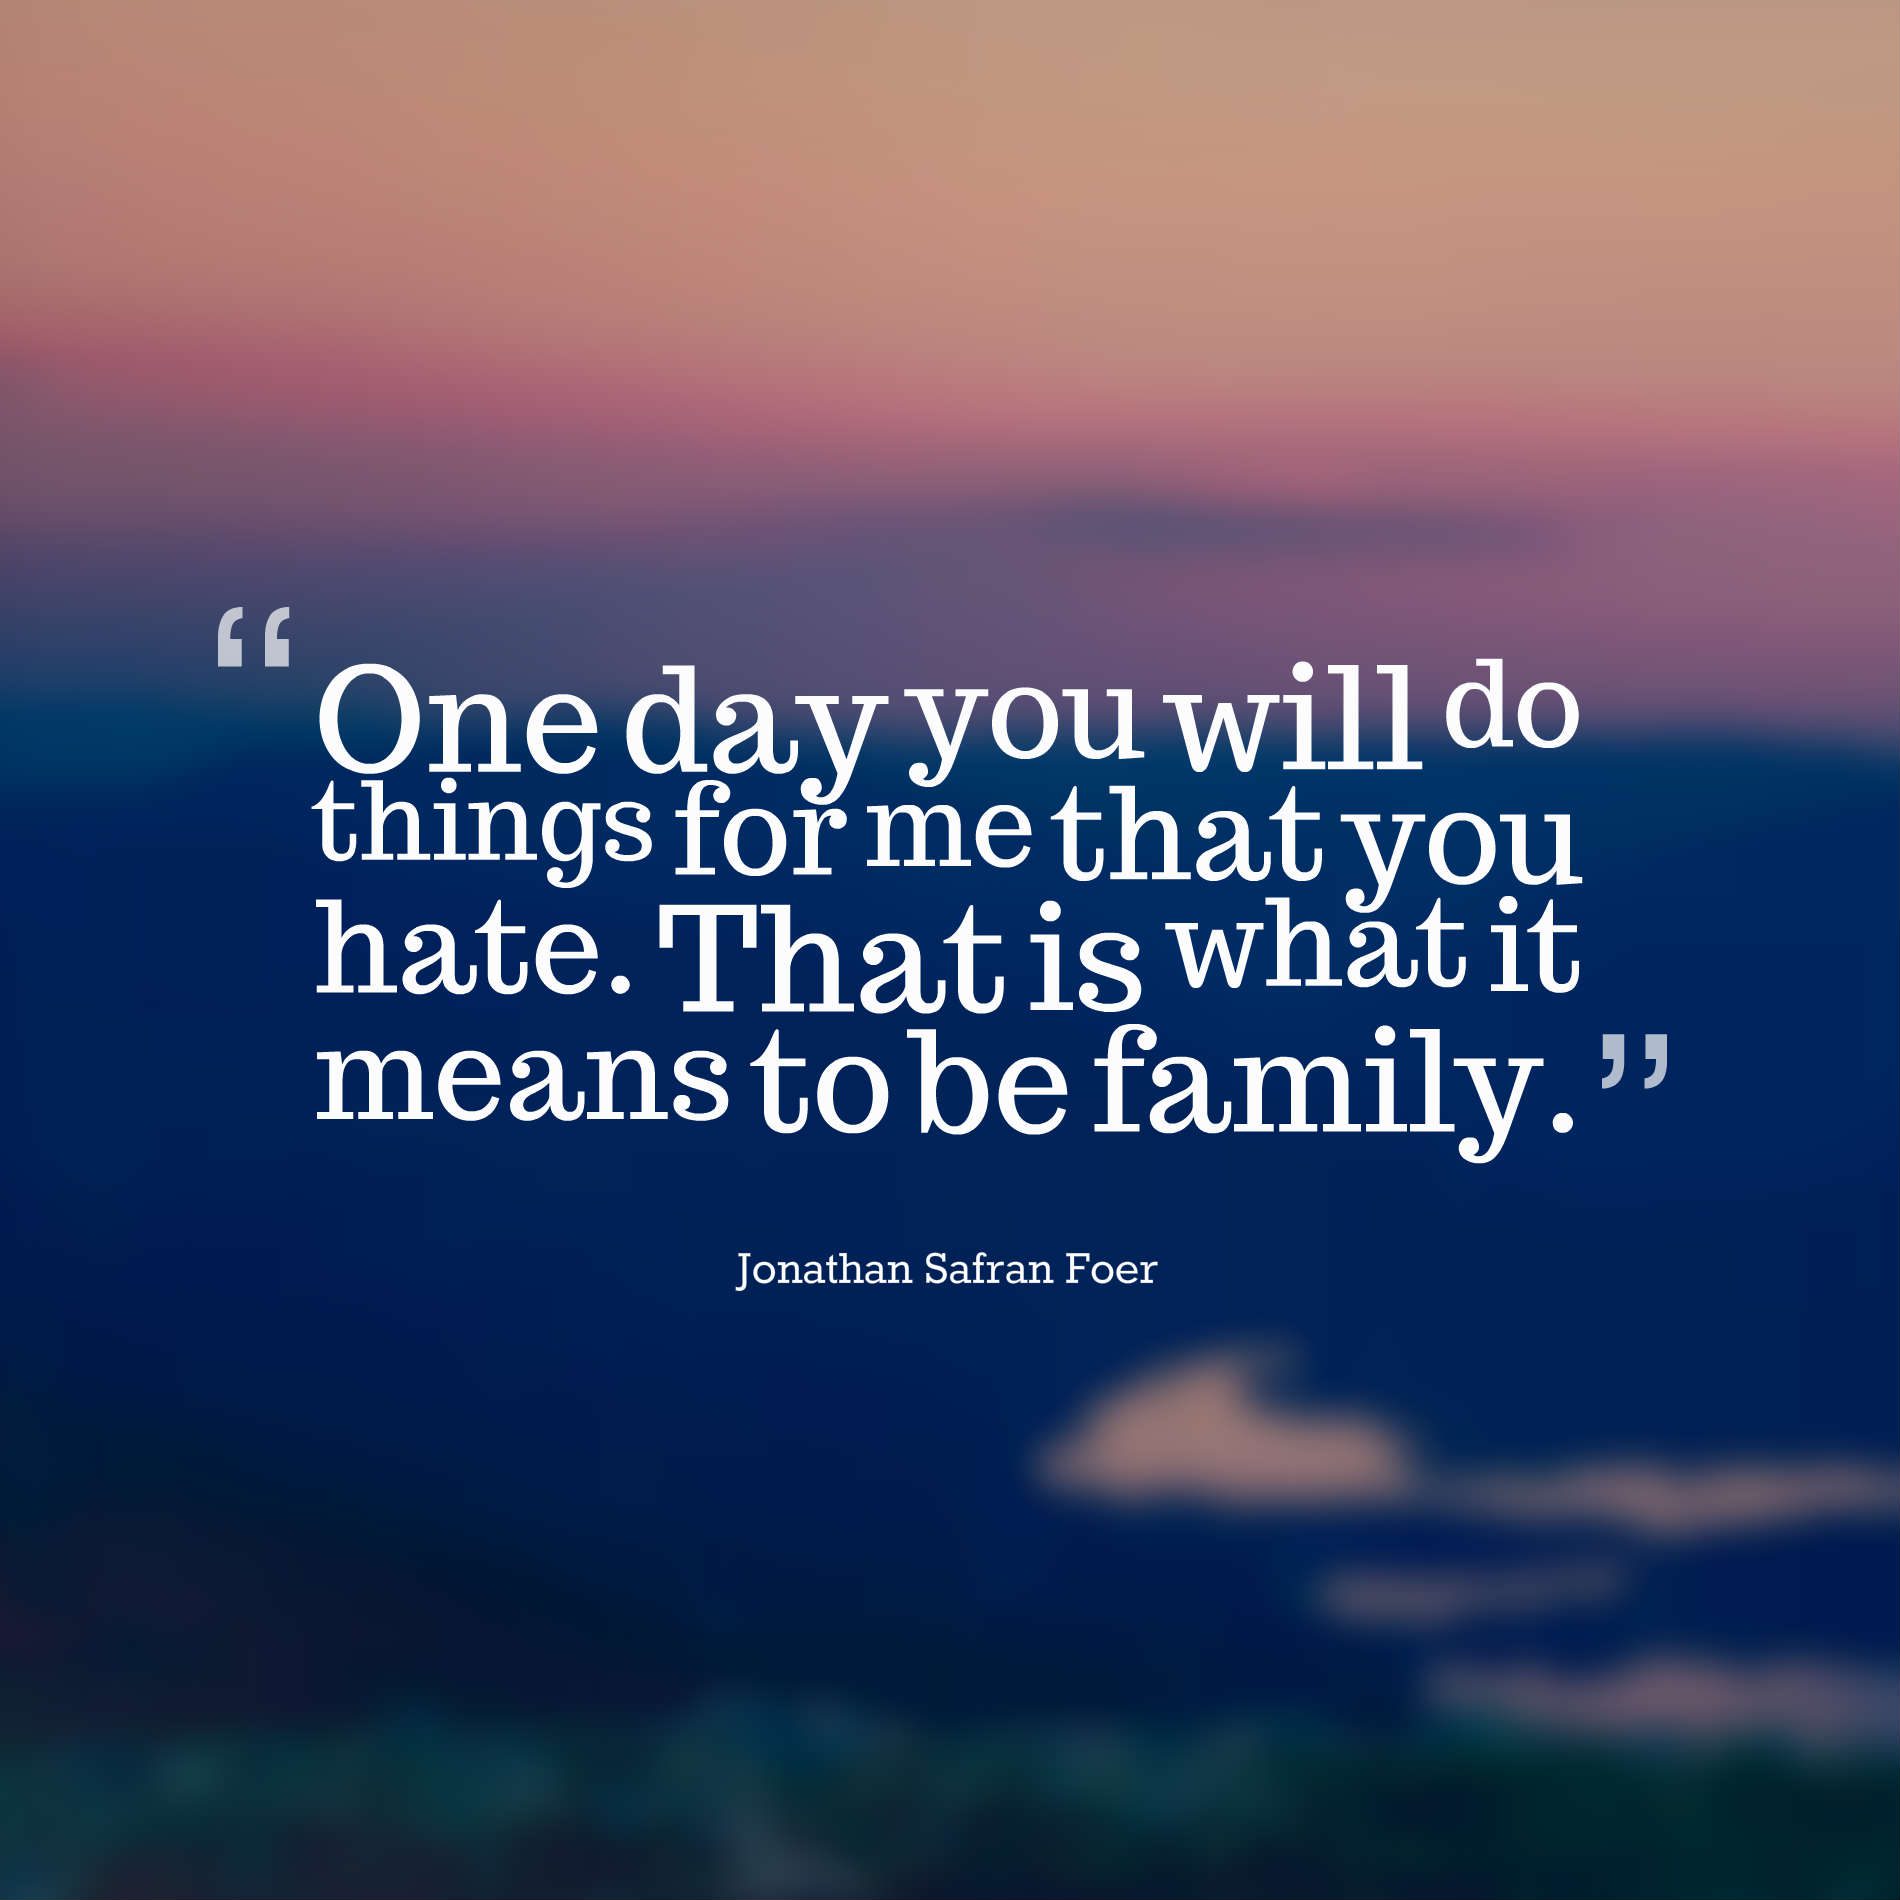 One day you will do things for me that you hate. That is what it means to be family.